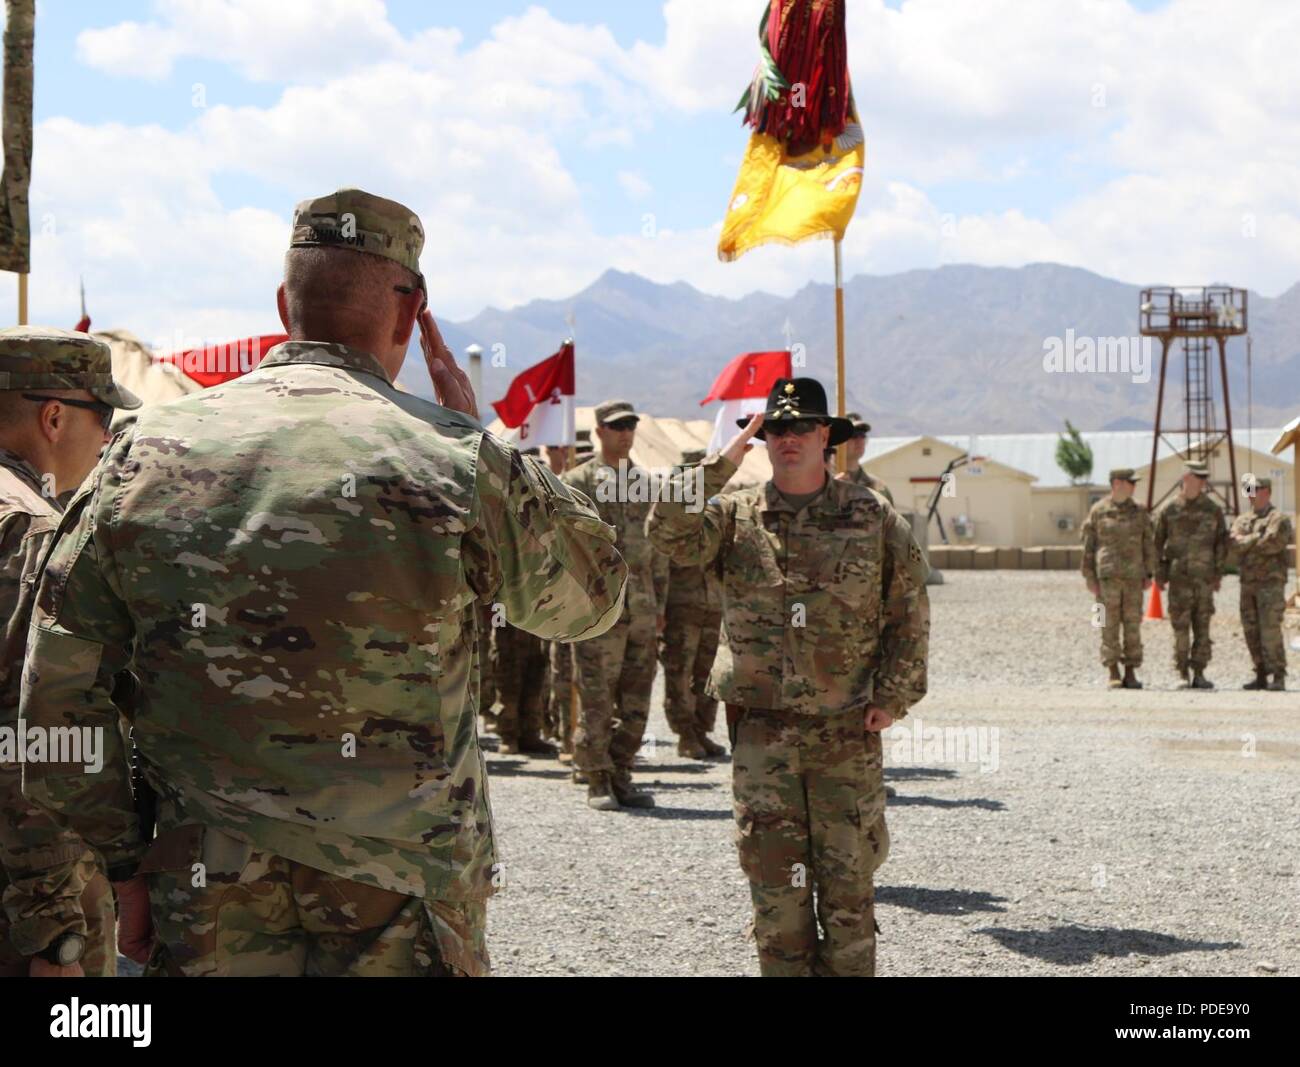 FORWARD OPERATING BASE LIGHTNING, Afghanistan (May 18, 2018) - U.S. Army  Maj. Daniel Britz salutes U.S. Army Brig. Gen. Richard Johnson, commander,  Task Force Southeast in front of a formation of soldiers